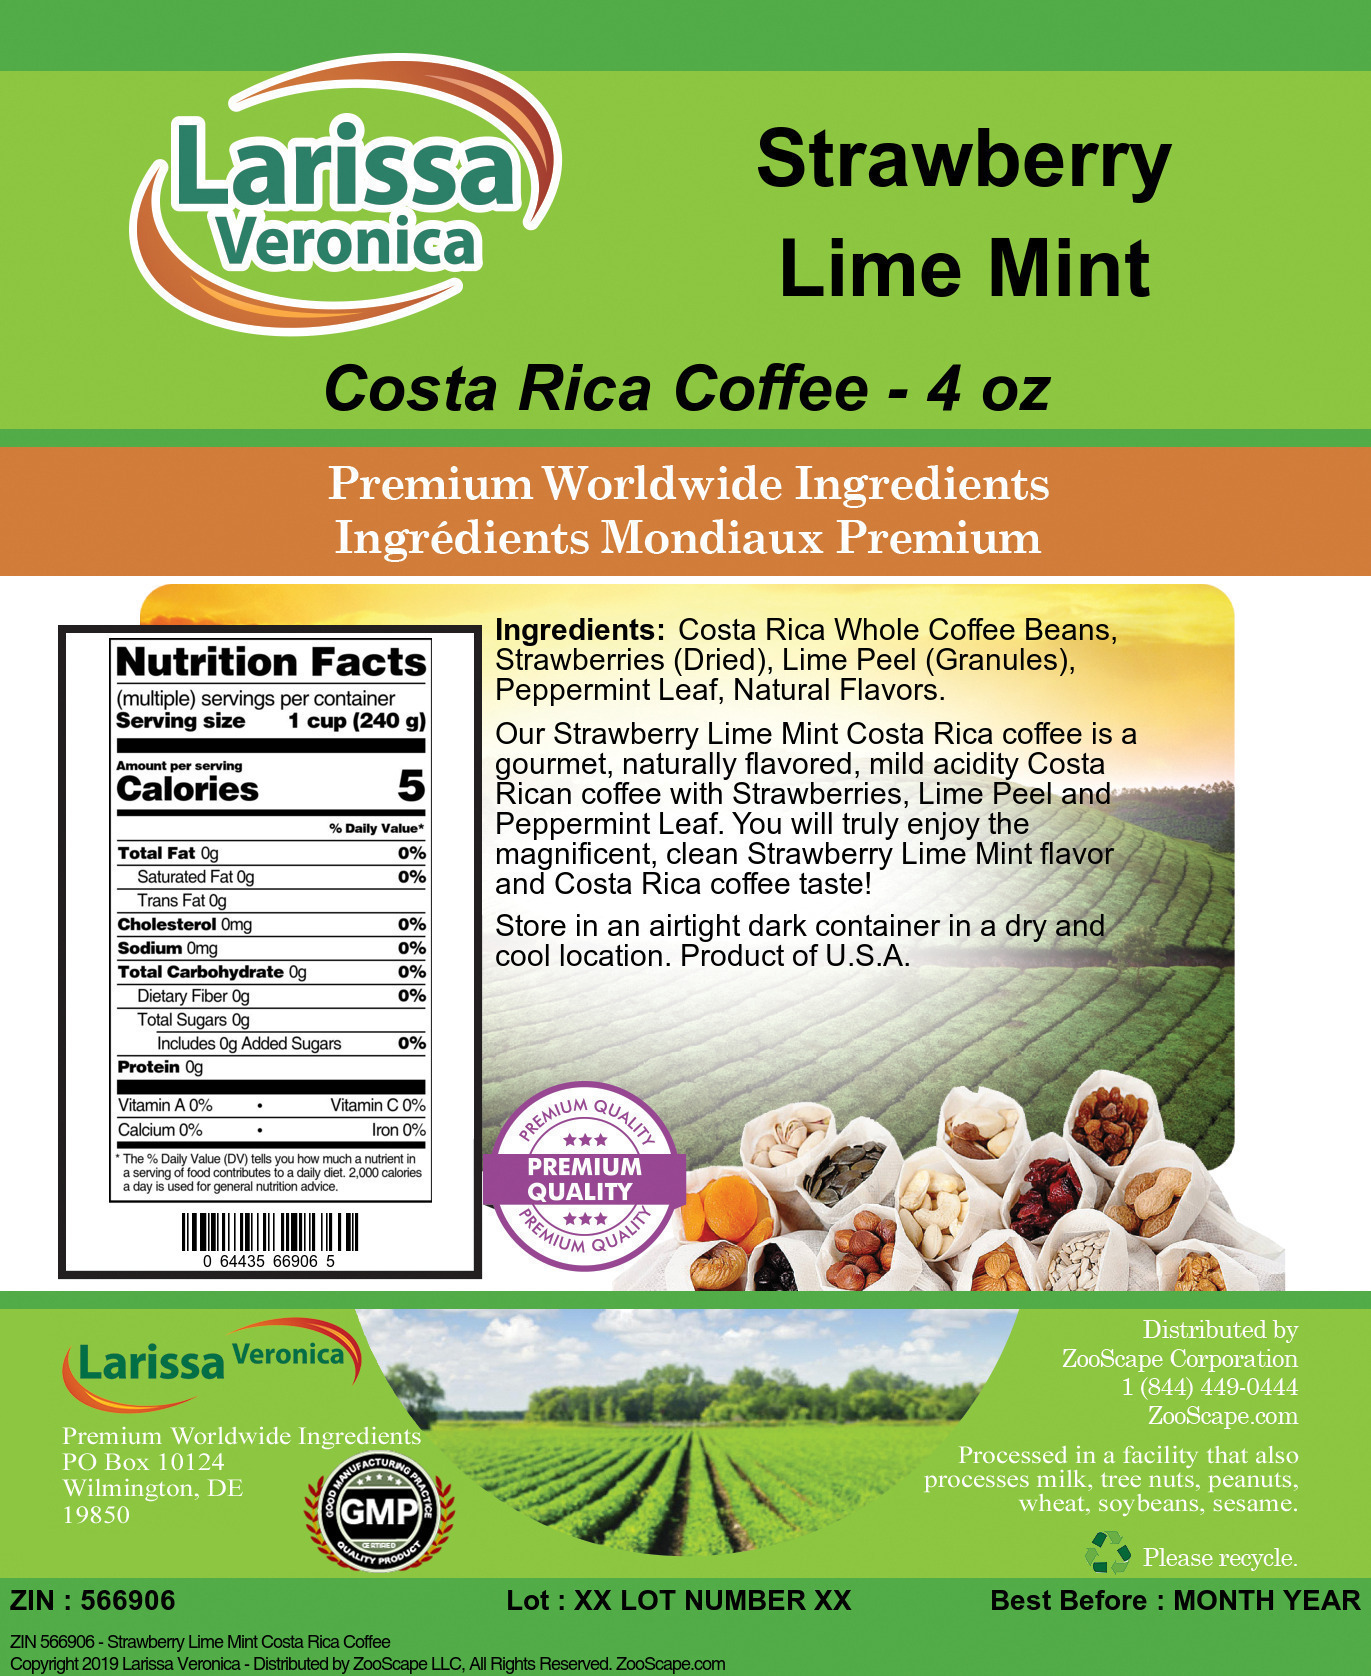 Strawberry Lime Mint Costa Rica Coffee - Label